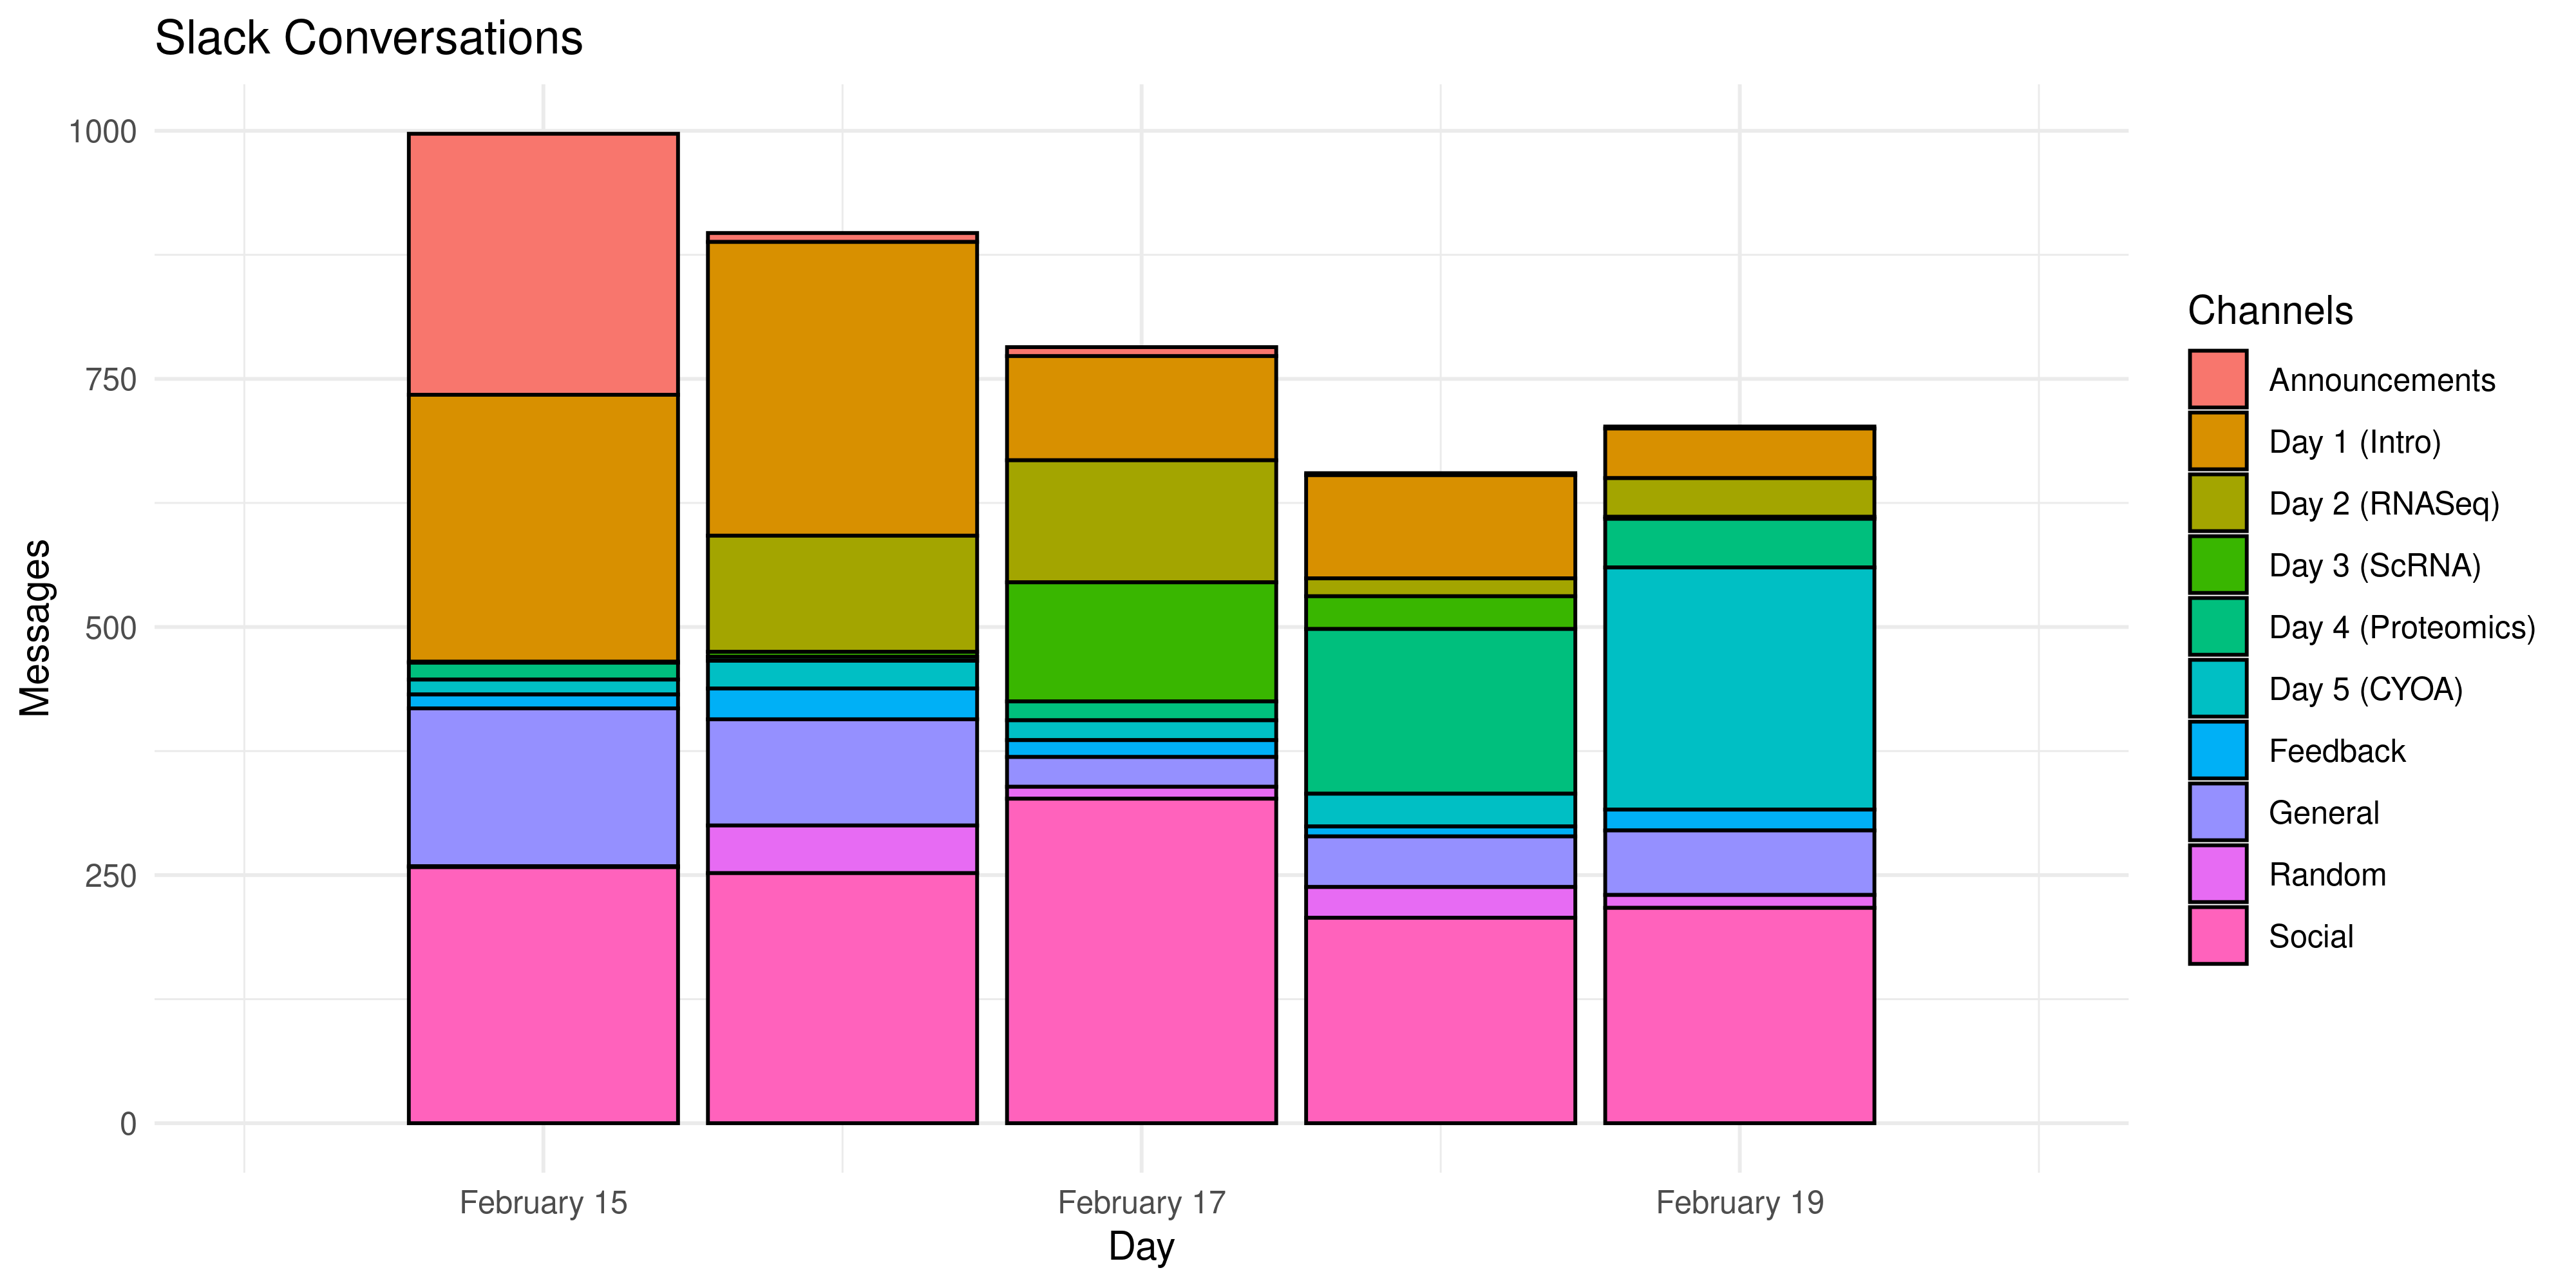 Bar chart of slack messages sent, many are social every day, others split into day 1/2/3/4/5